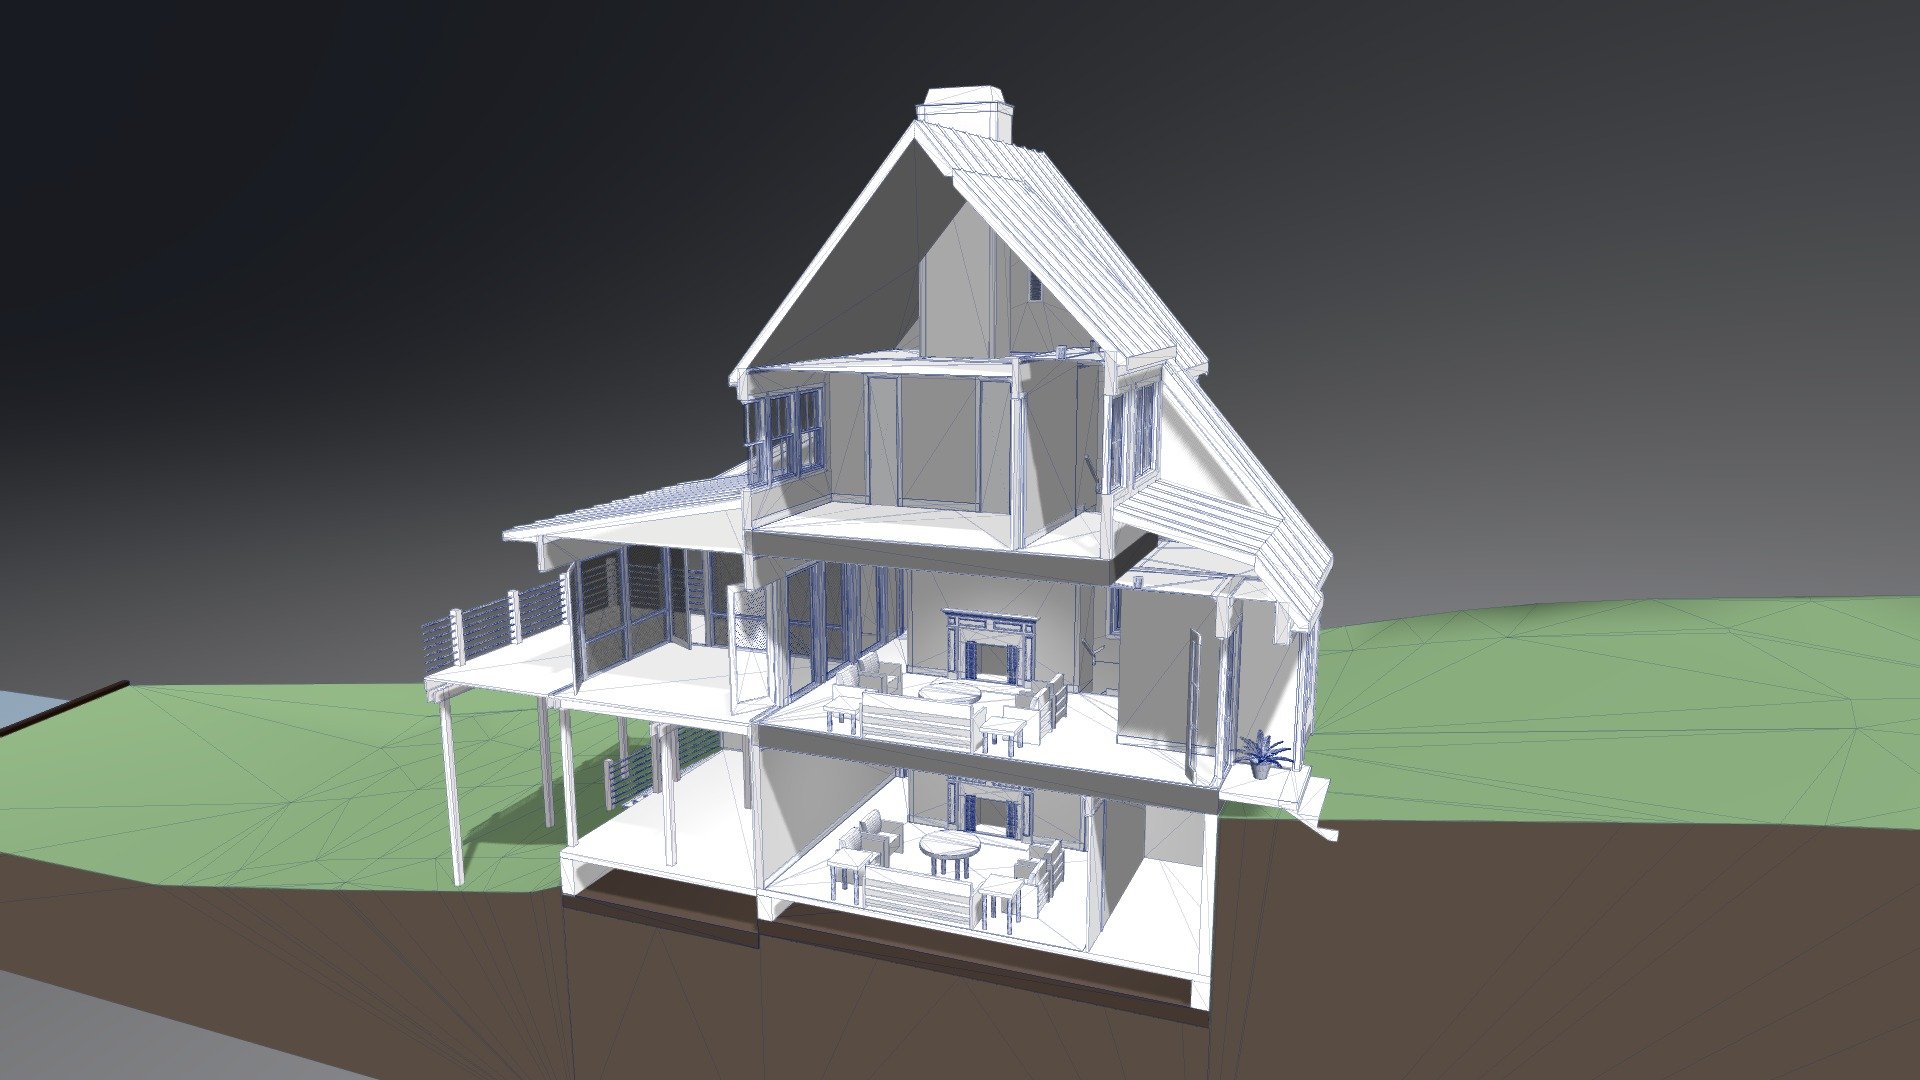 Lake House Building Section